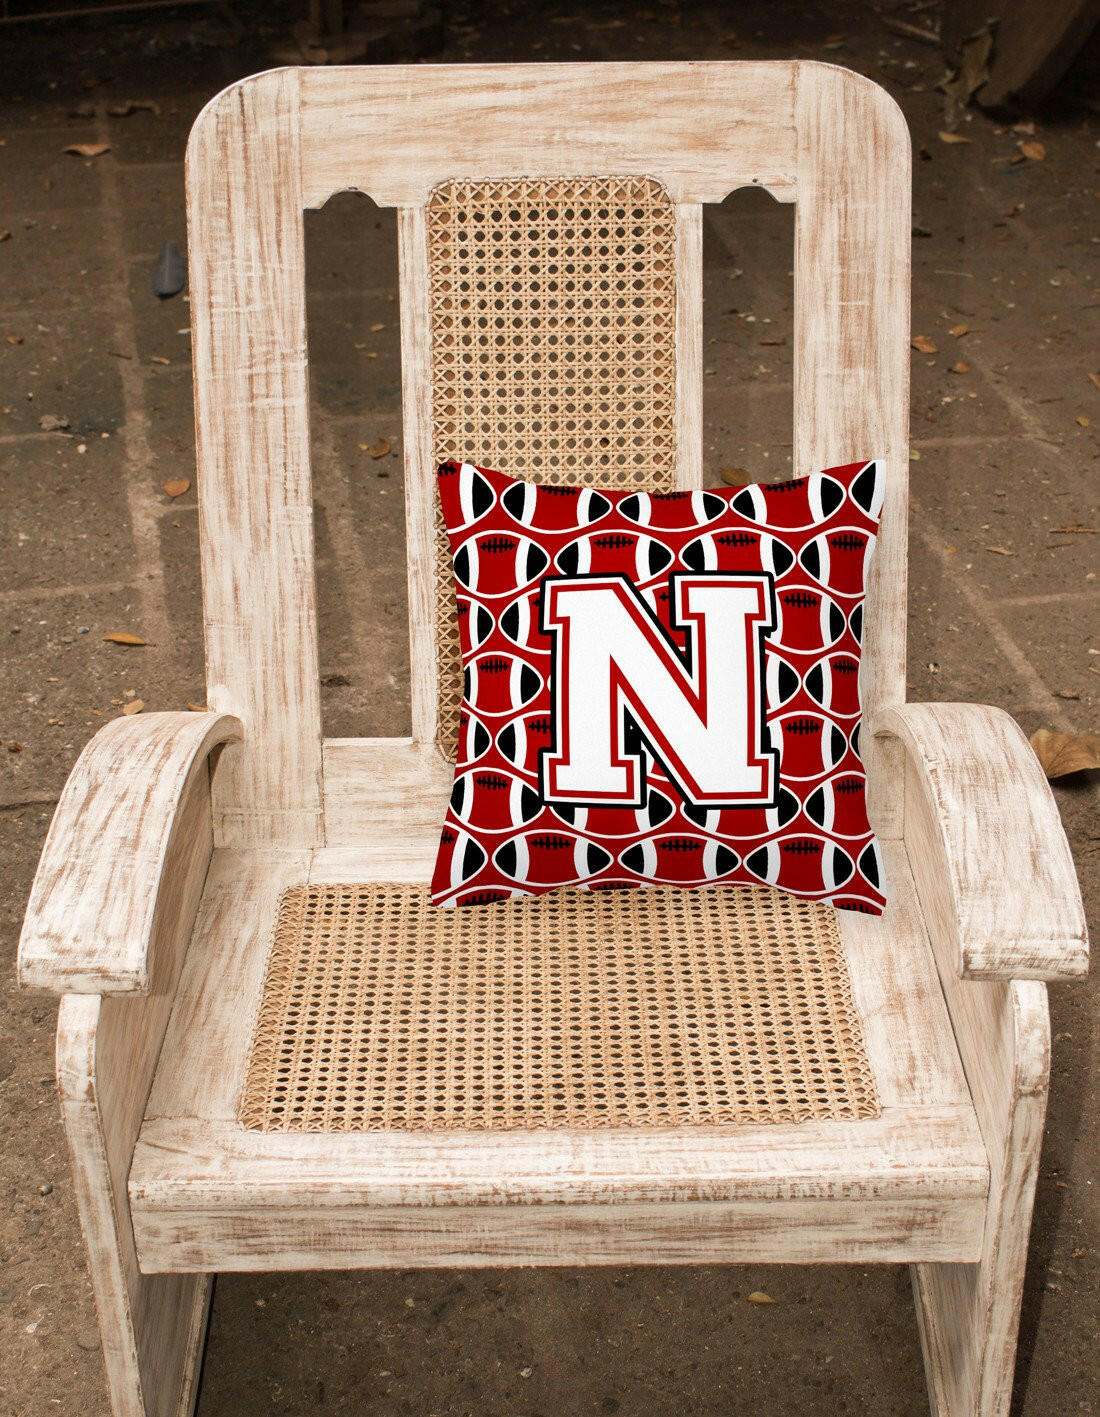 Letter N Football Cardinal and White Fabric Decorative Pillow CJ1082-NPW1414 by Caroline's Treasures